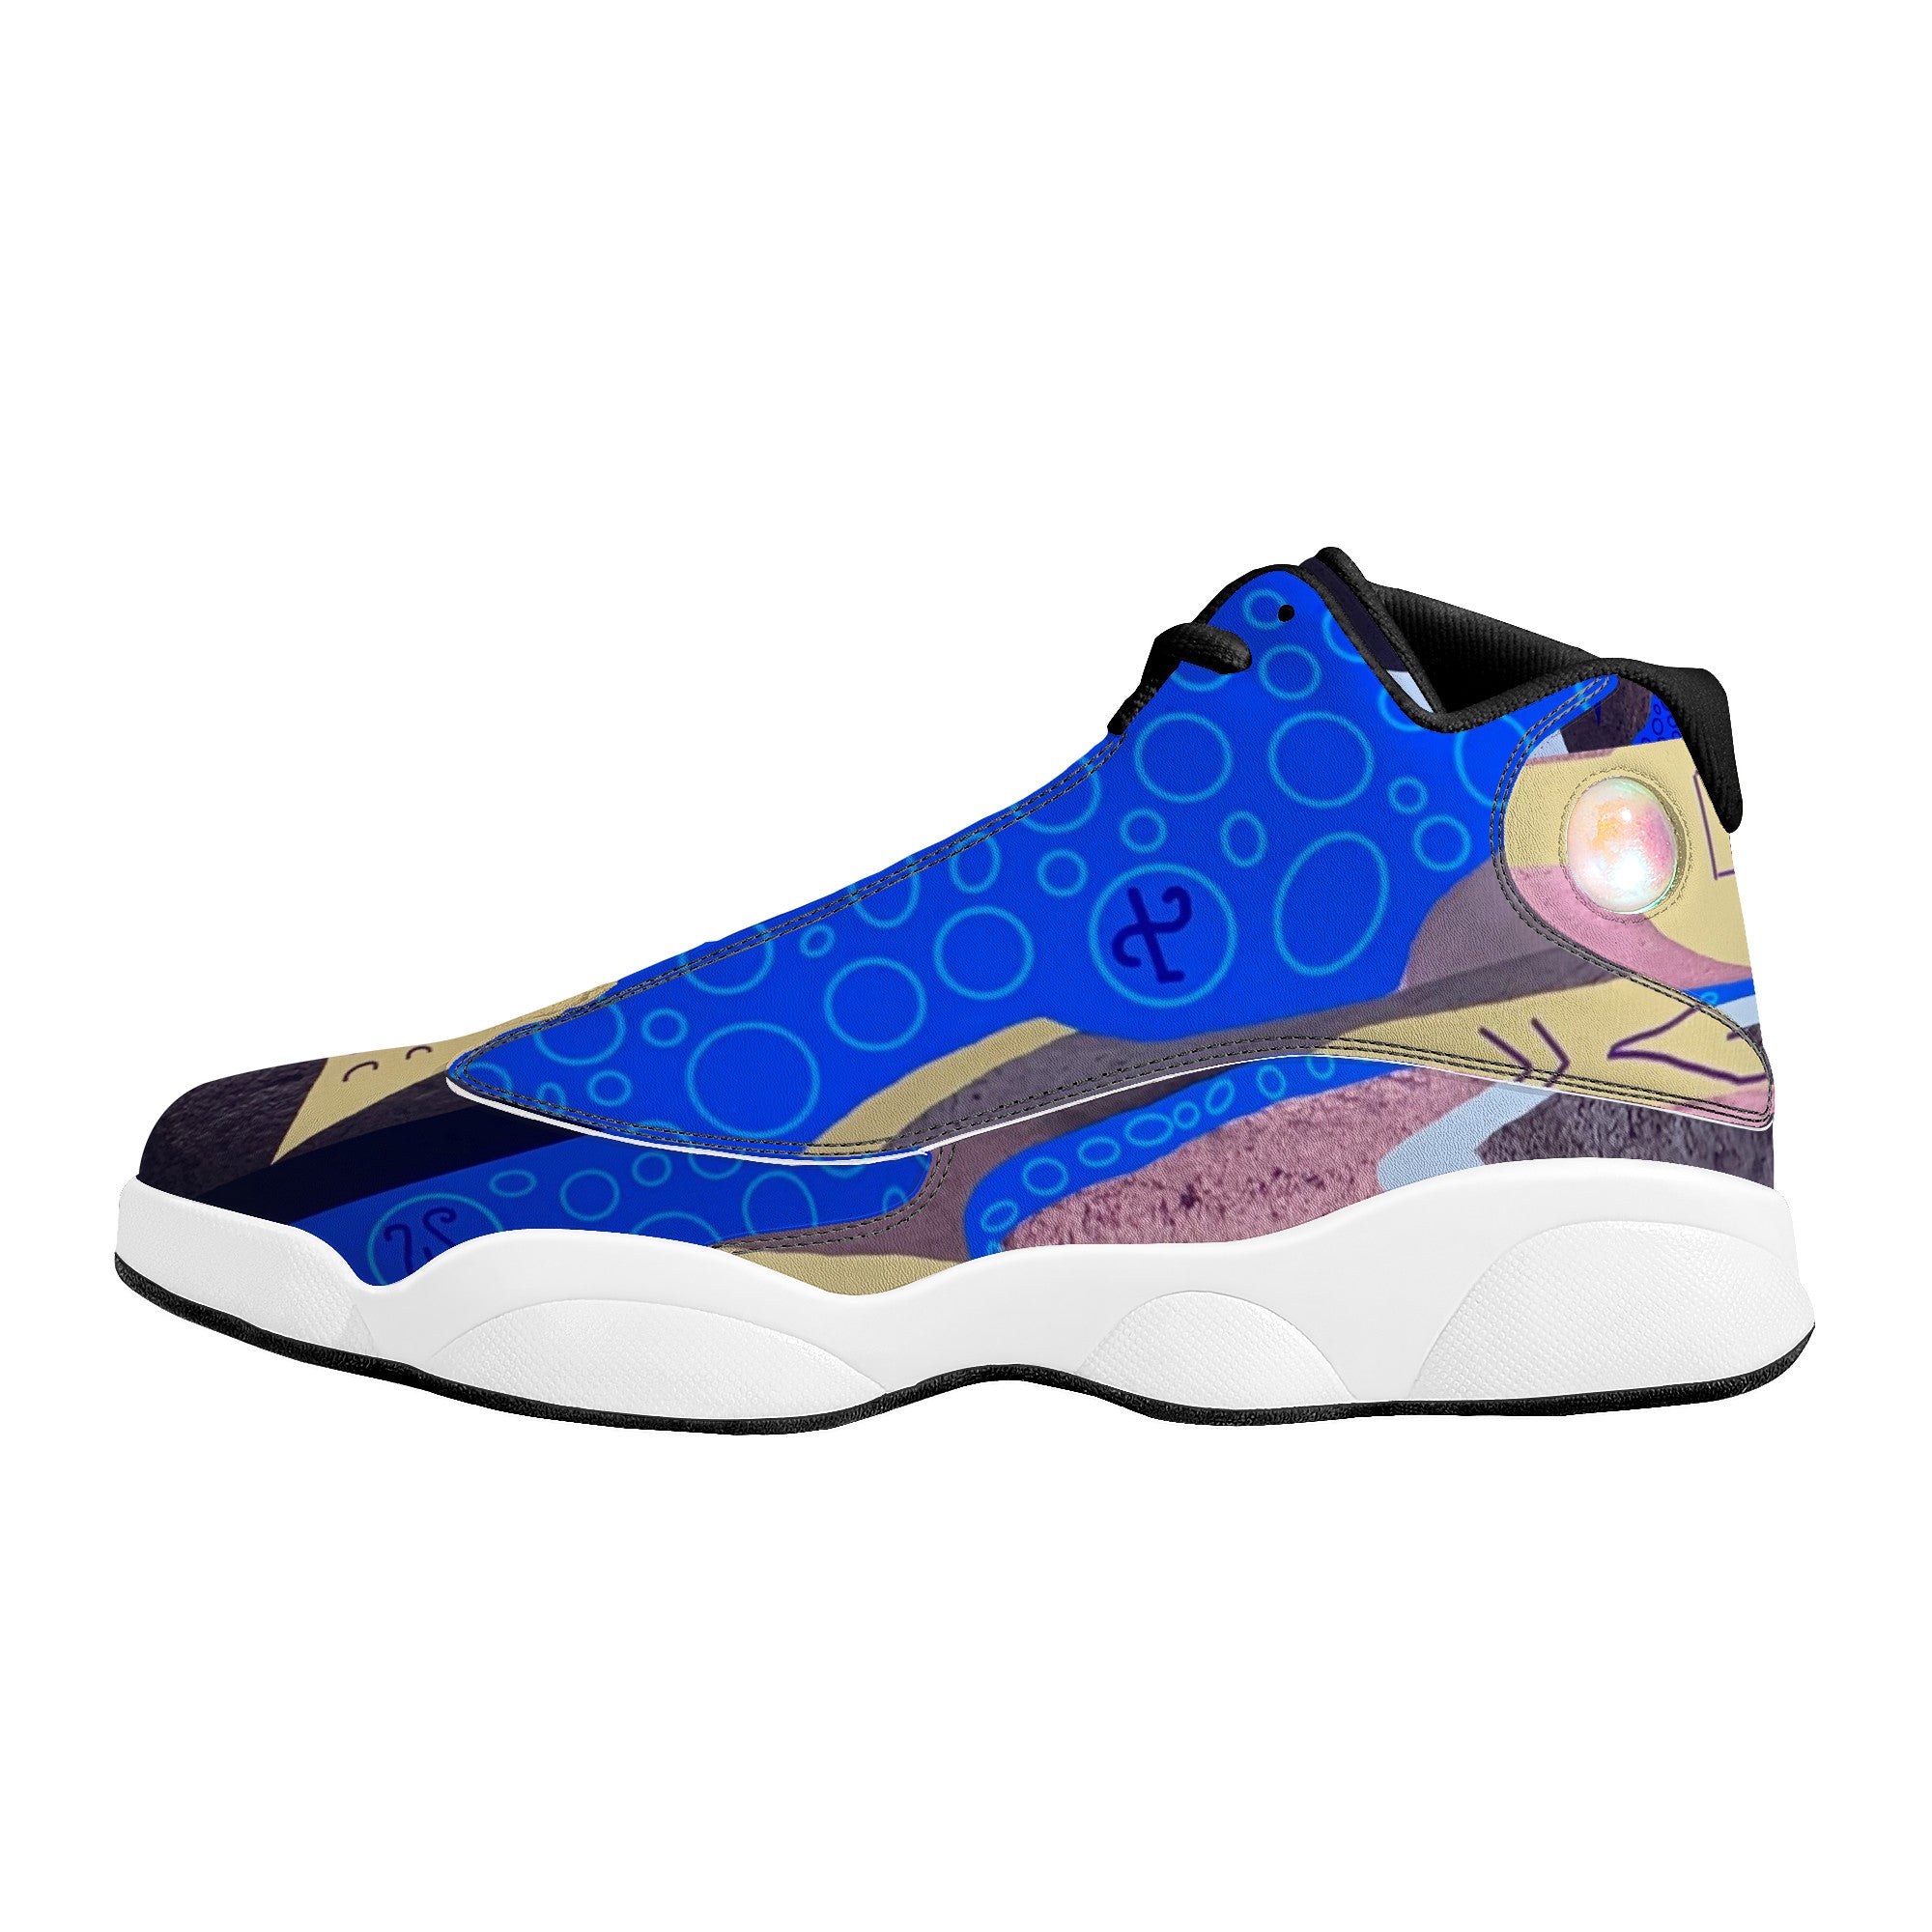 Putup whale blessings | Customized Basketball Sneakers - Black - Shoe Zero